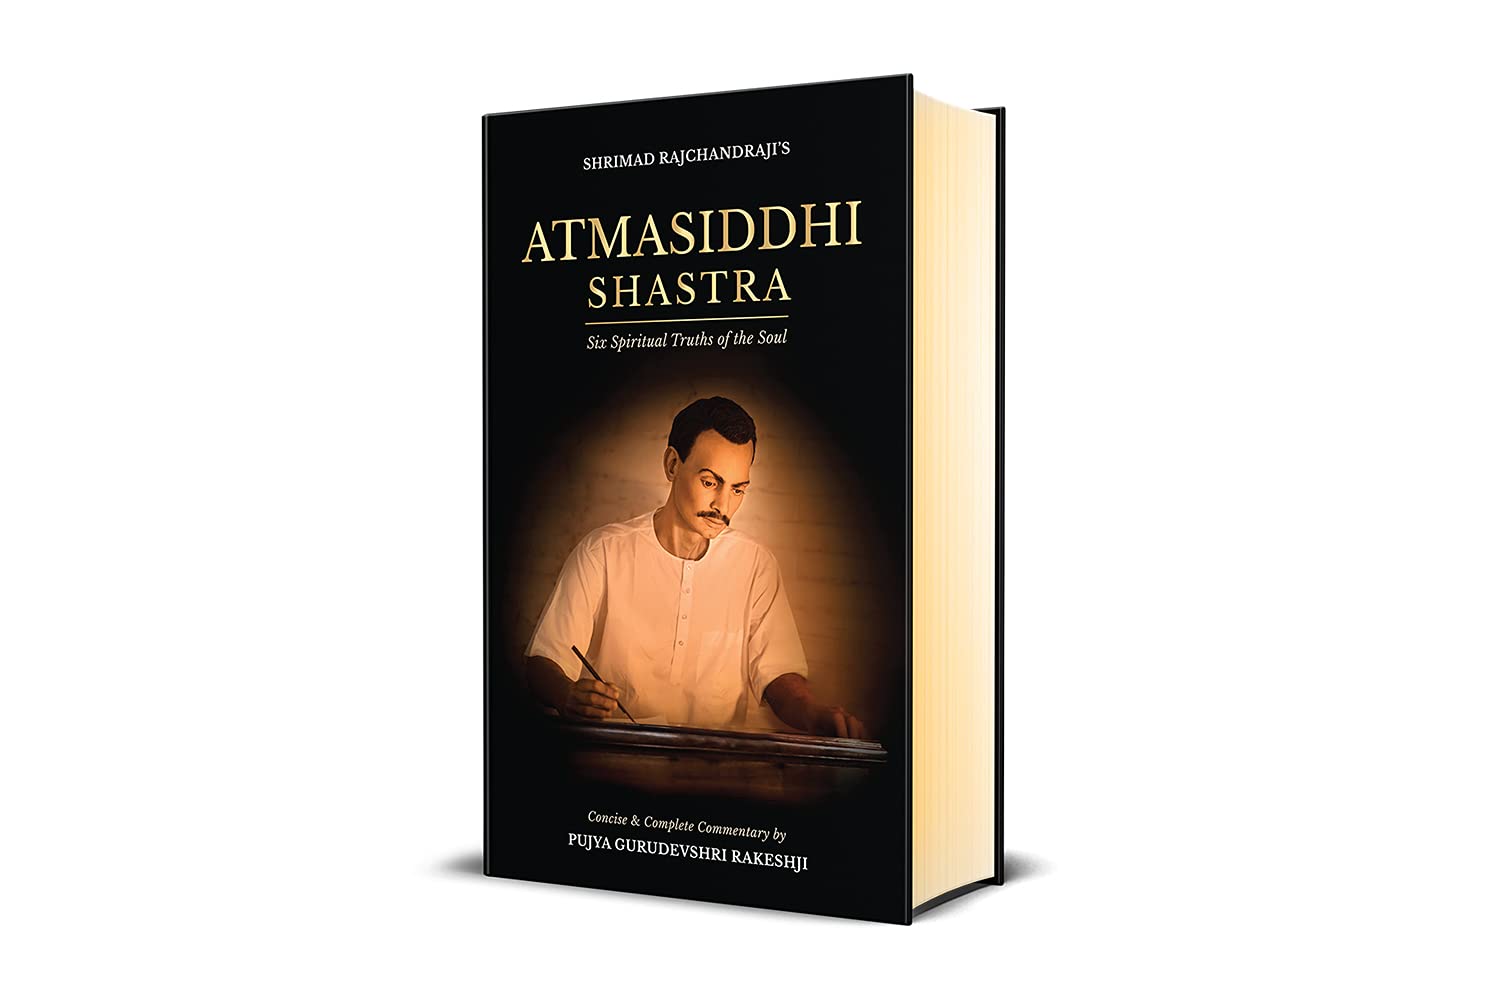 ATMASIDDHI SHASTRA: SIX SPIRITUAL TRUTHS OF THE SOUL